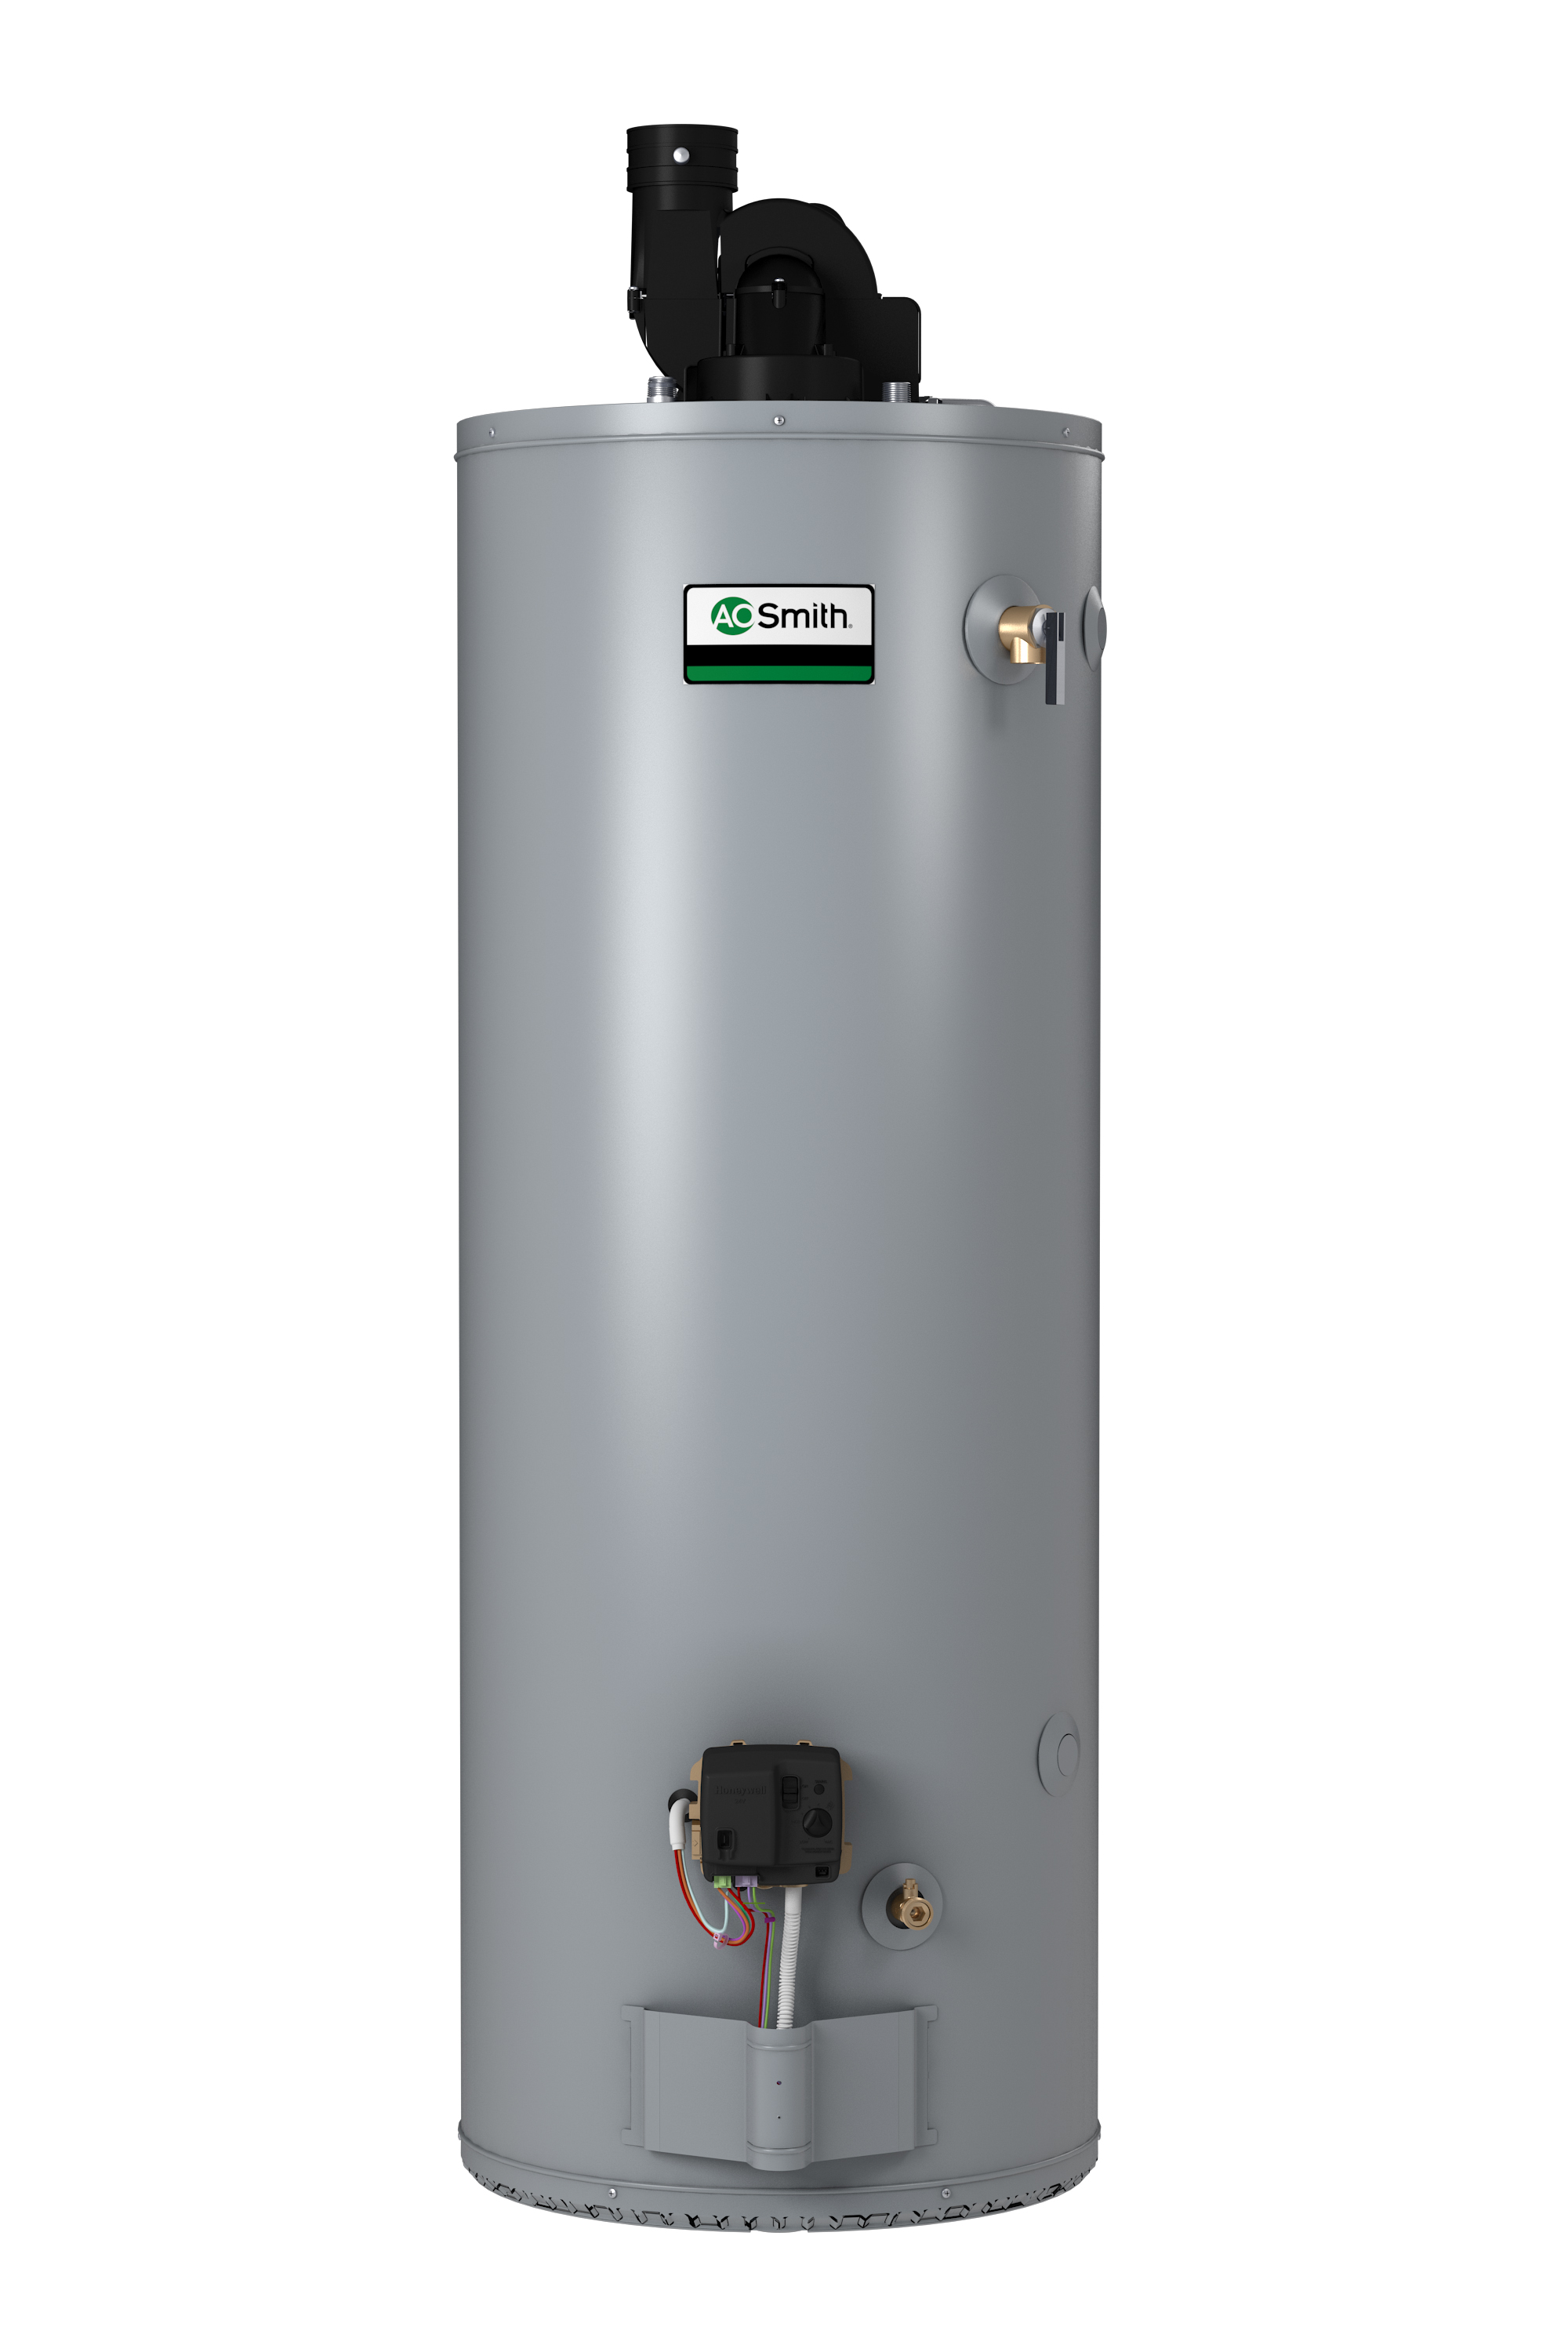 AO SMITH BPD-80: 75 GALLON, 76,000 BTU, 3inch OR 4inch VENT, CONSERVATIONIST POWER DIRECT VENT, SINGLE FLUE, NATURAL GAS COMMERICAL WATER HEATER, GOOD TO 10,100' ALTITUDE